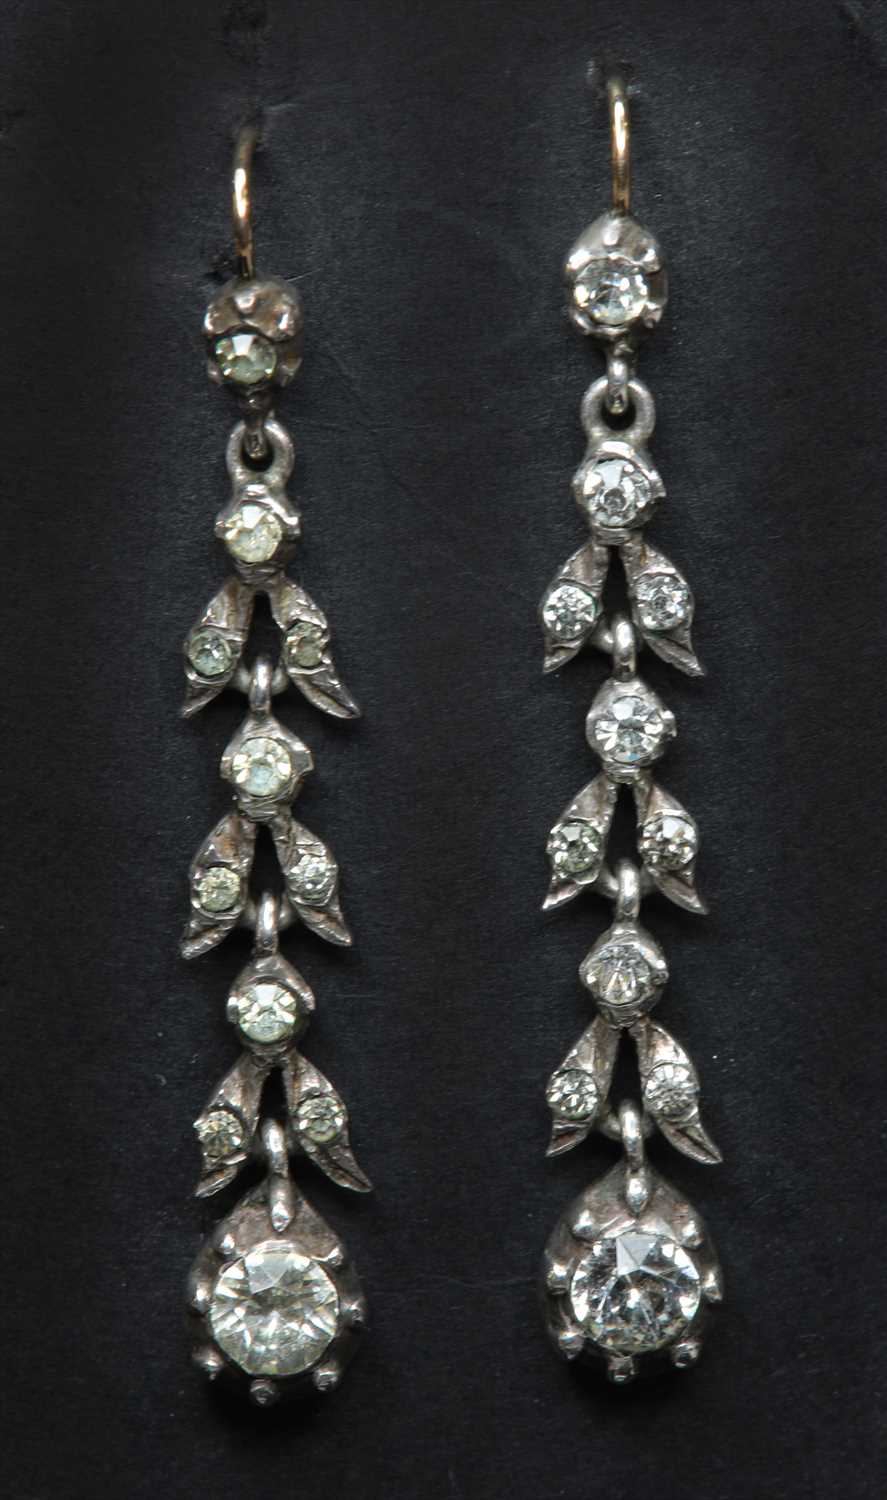 Lot 2 - A pair of late Georgian silver and gold paste drop earrings